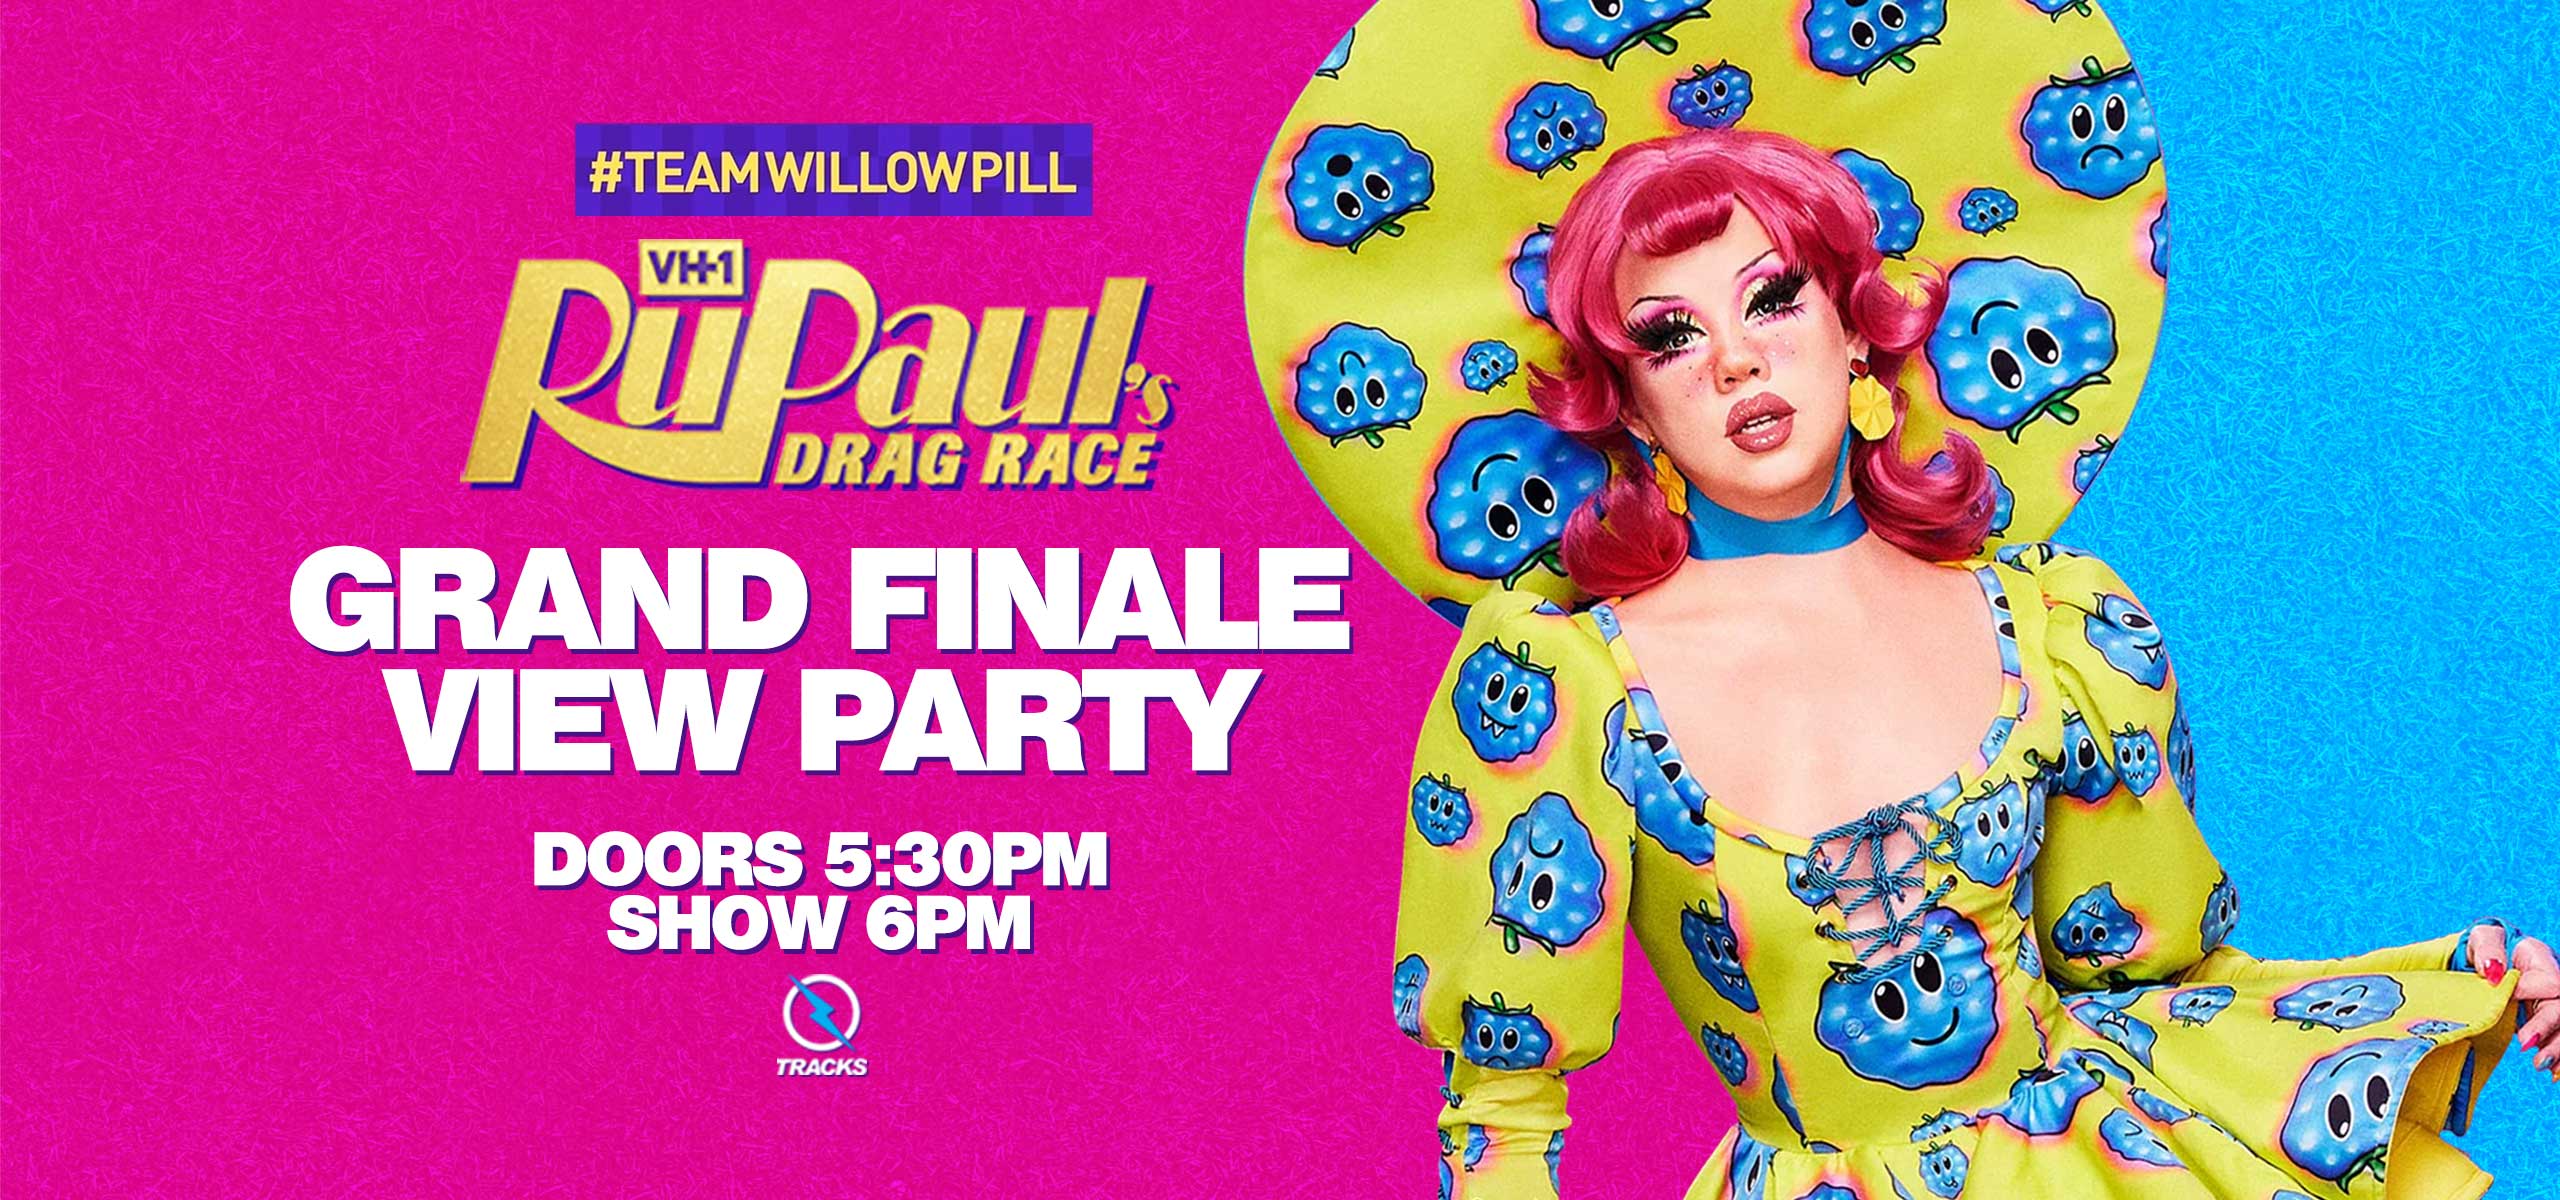 RuPaul's Drag Race Grand Finale View Party Tracks